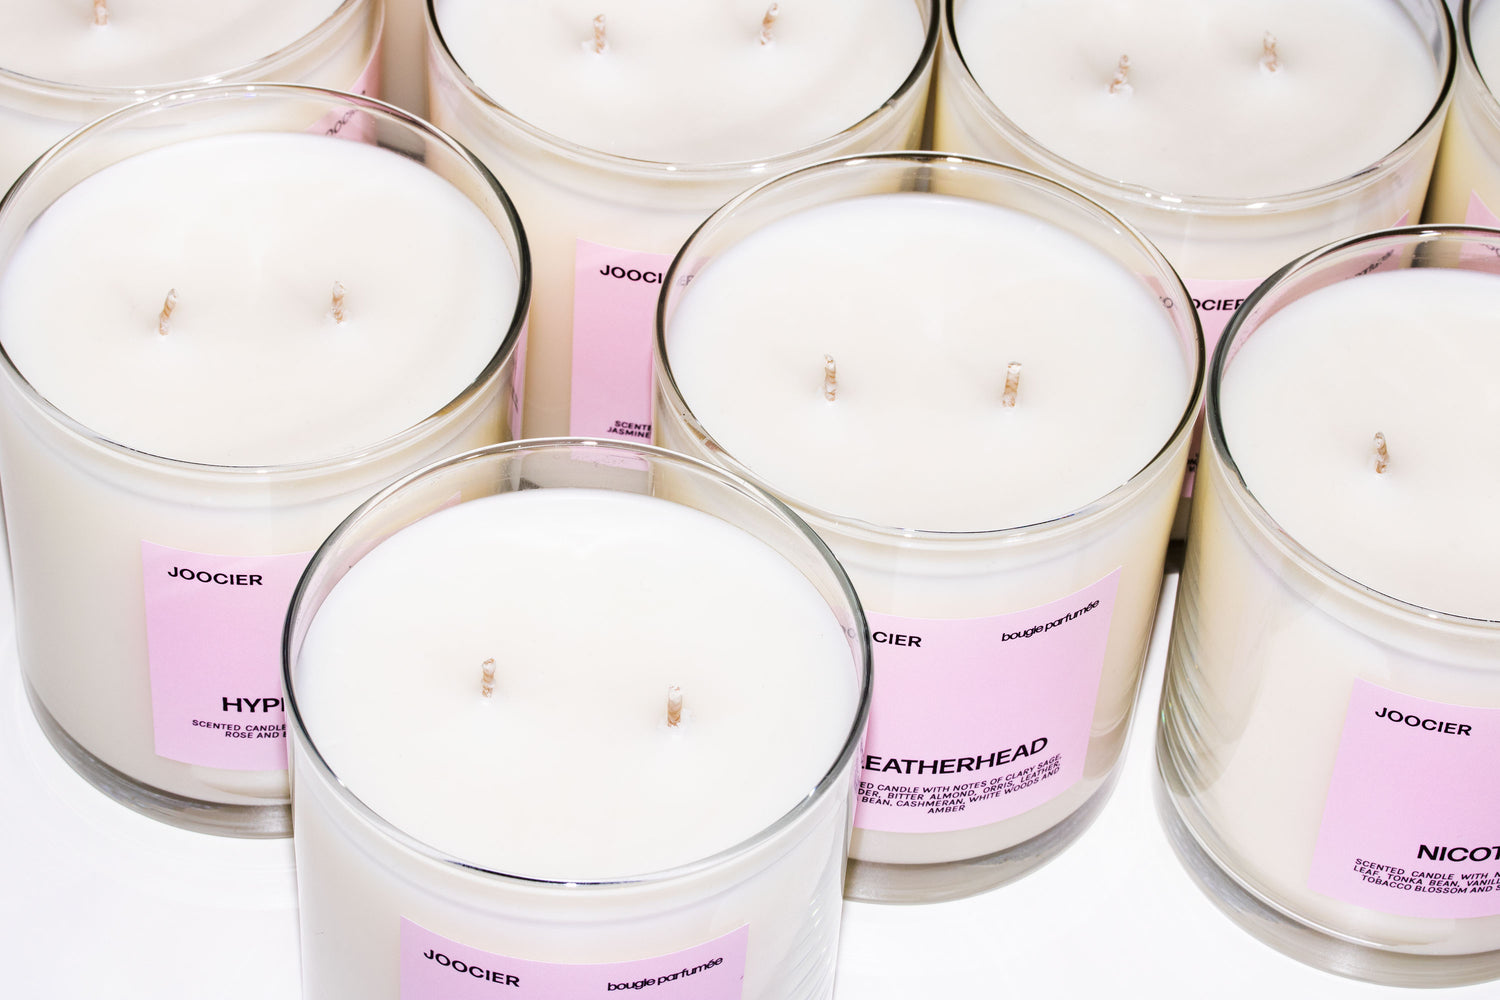 Vegan cruelty free candles inspired by luxury fragrances